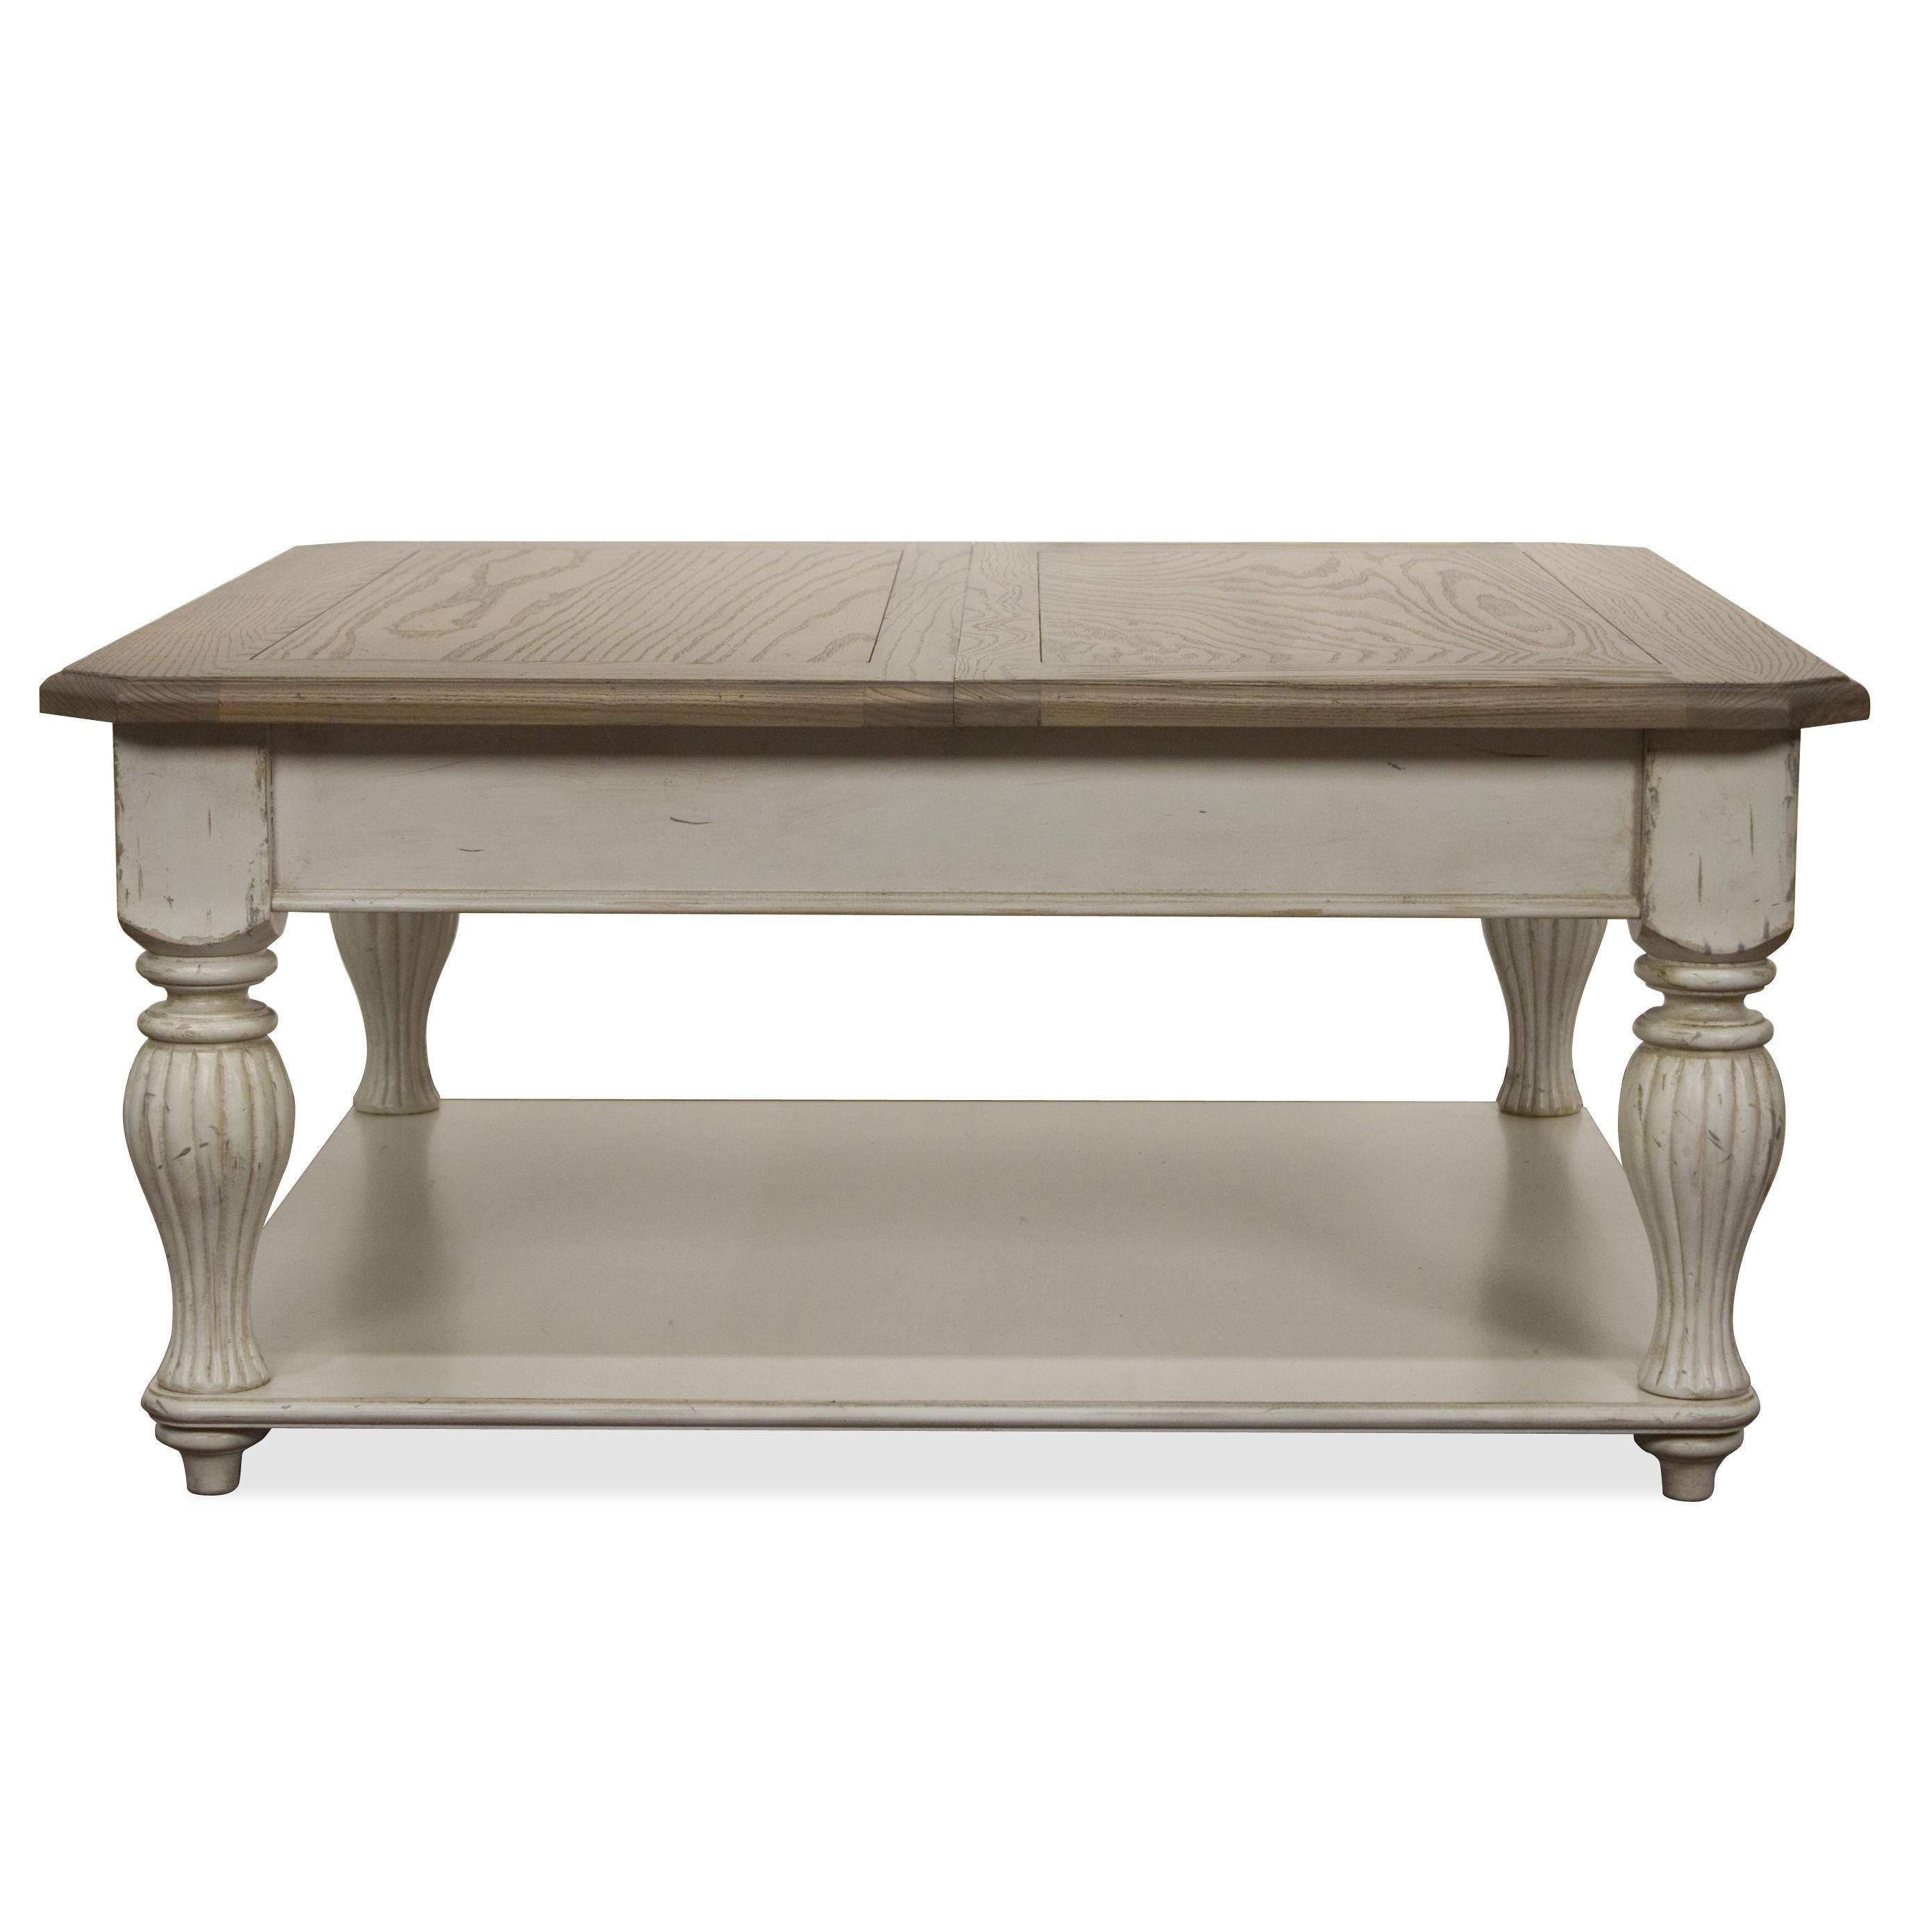 Antique White And Wood Coffee Table – Coffee Addicts Intended For Square Wooden Coffee Table (View 13 of 15)